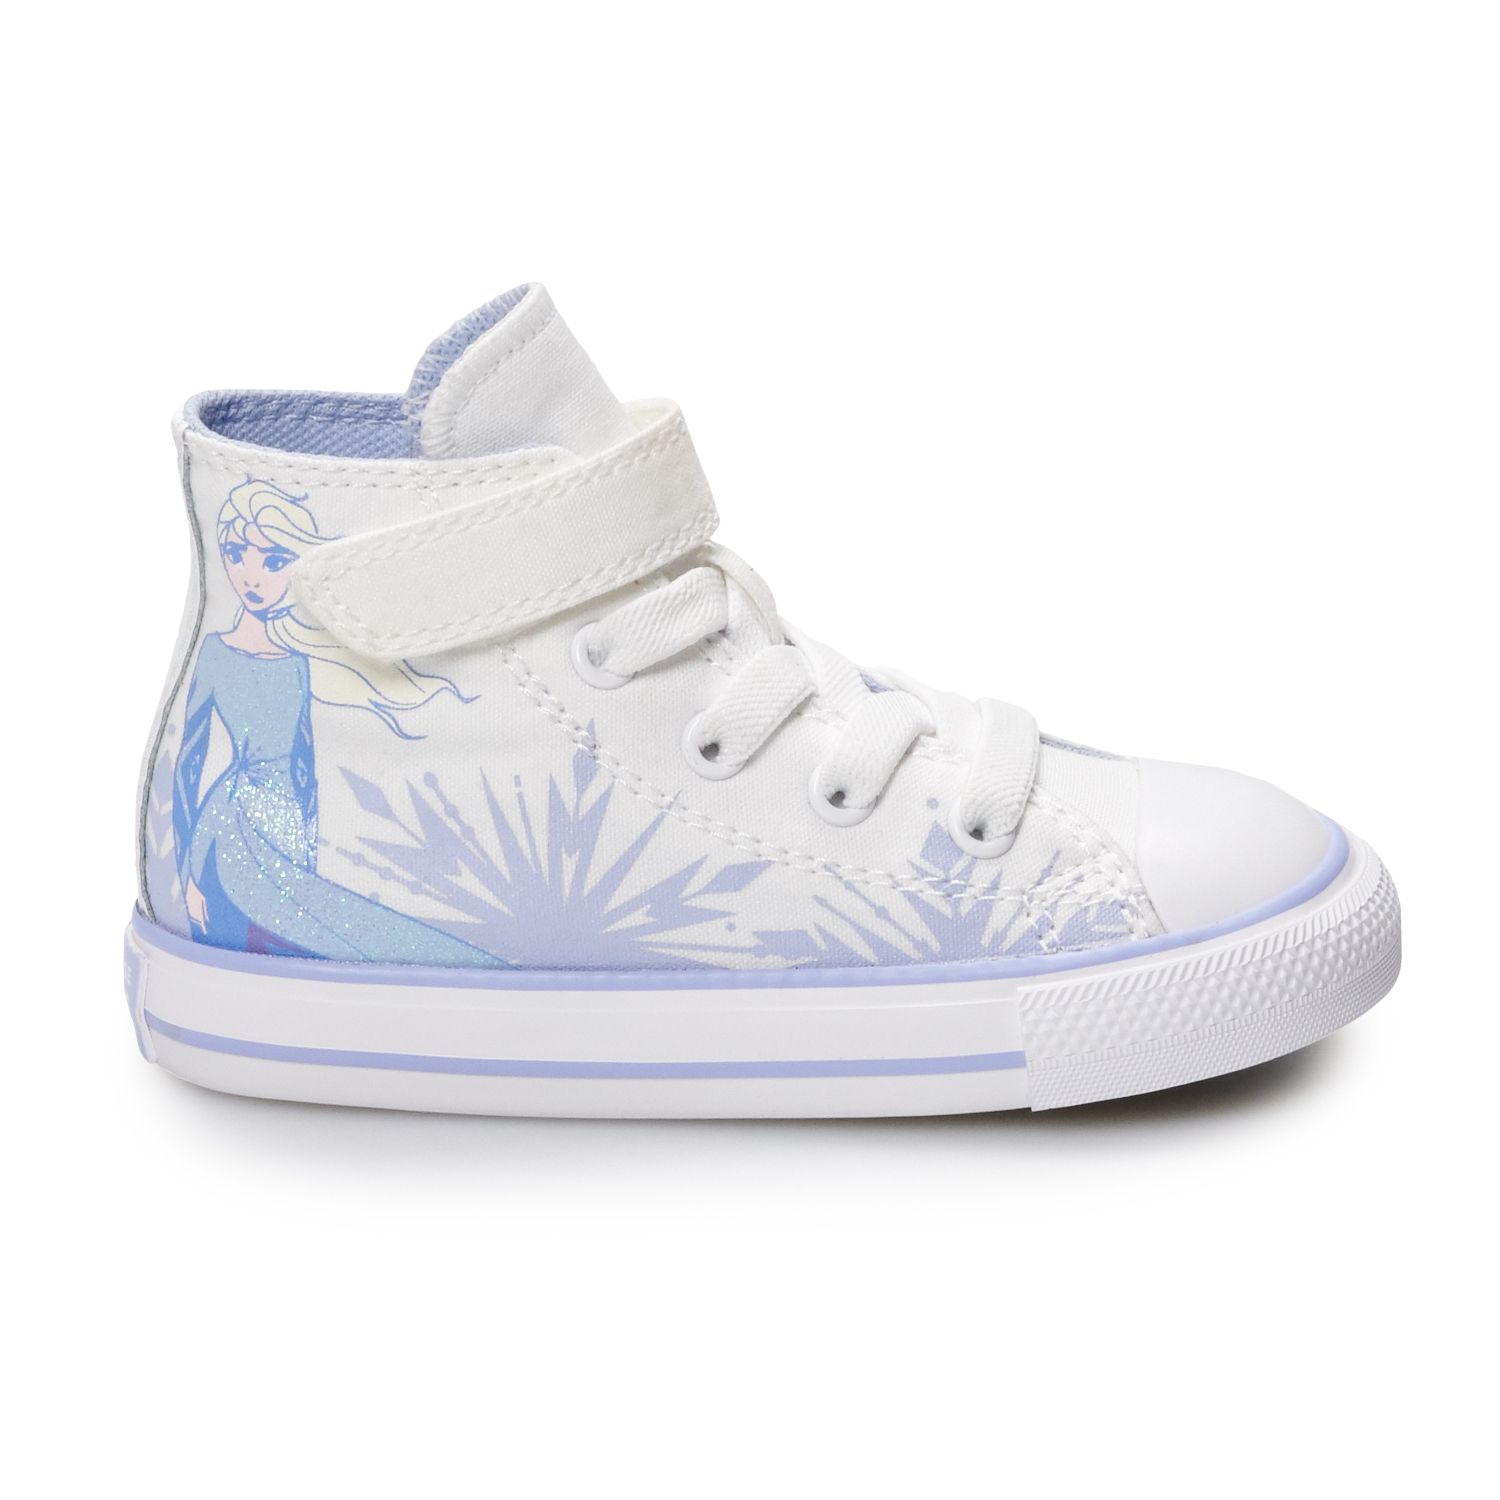 converse wedge sneakers for girls